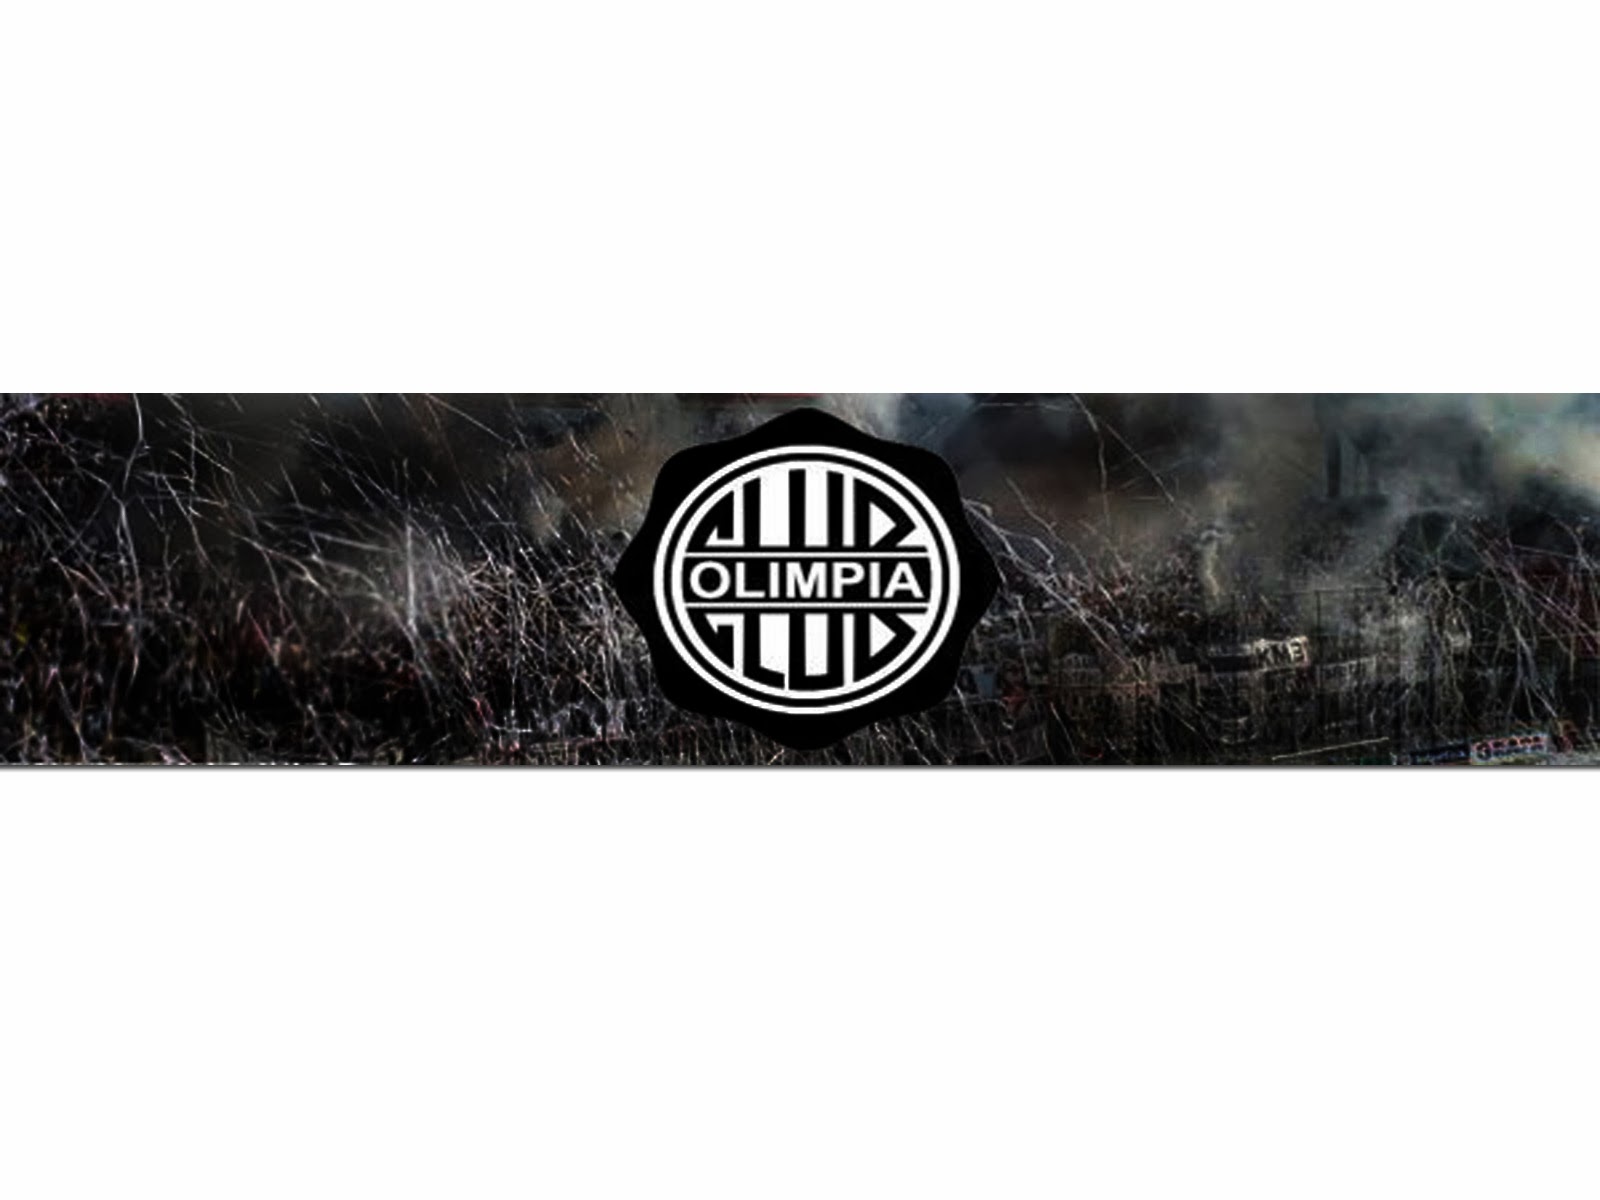 Club Olimpia Wallpapers